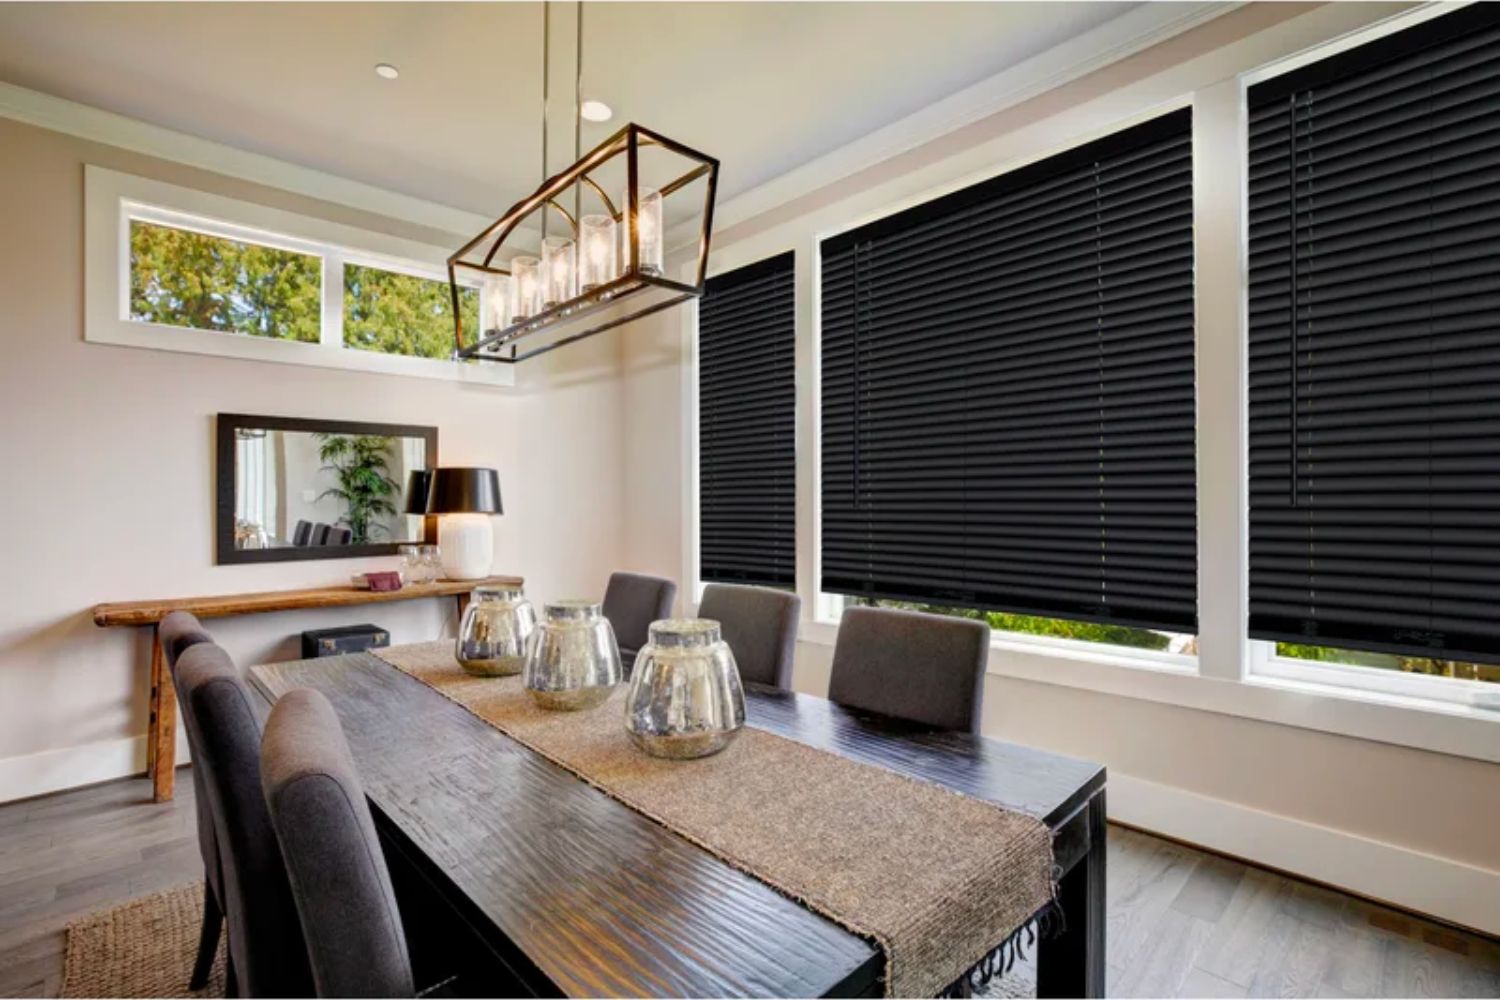 The Best Places to Buy Blinds Online Option: Wayfair